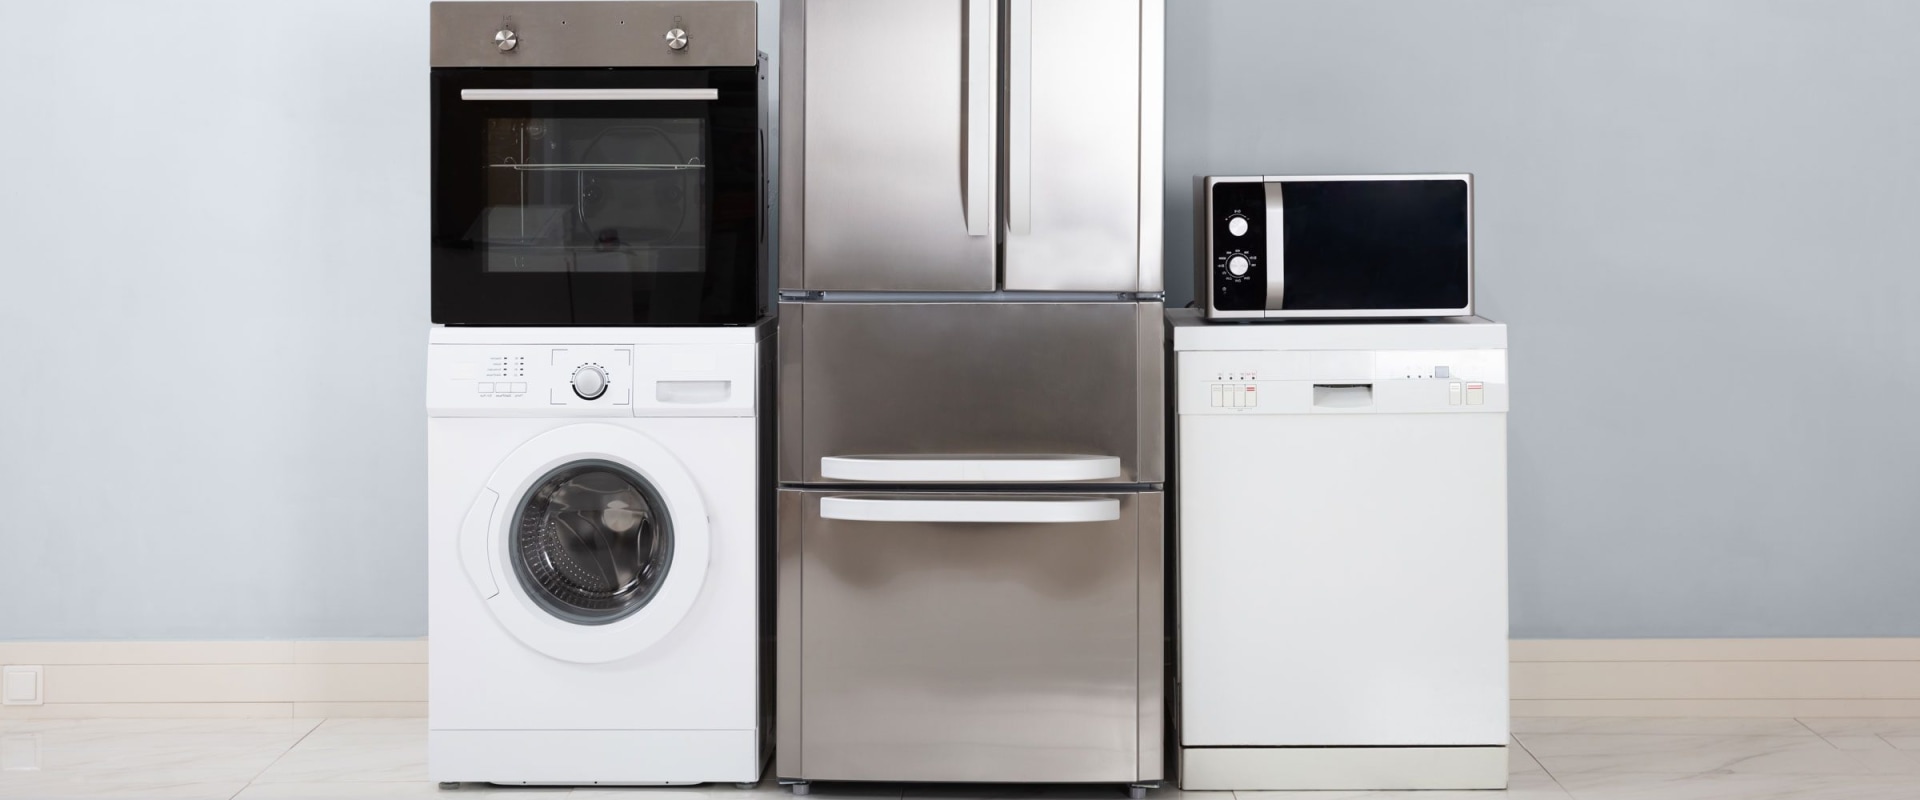 What brand sells the most appliances?